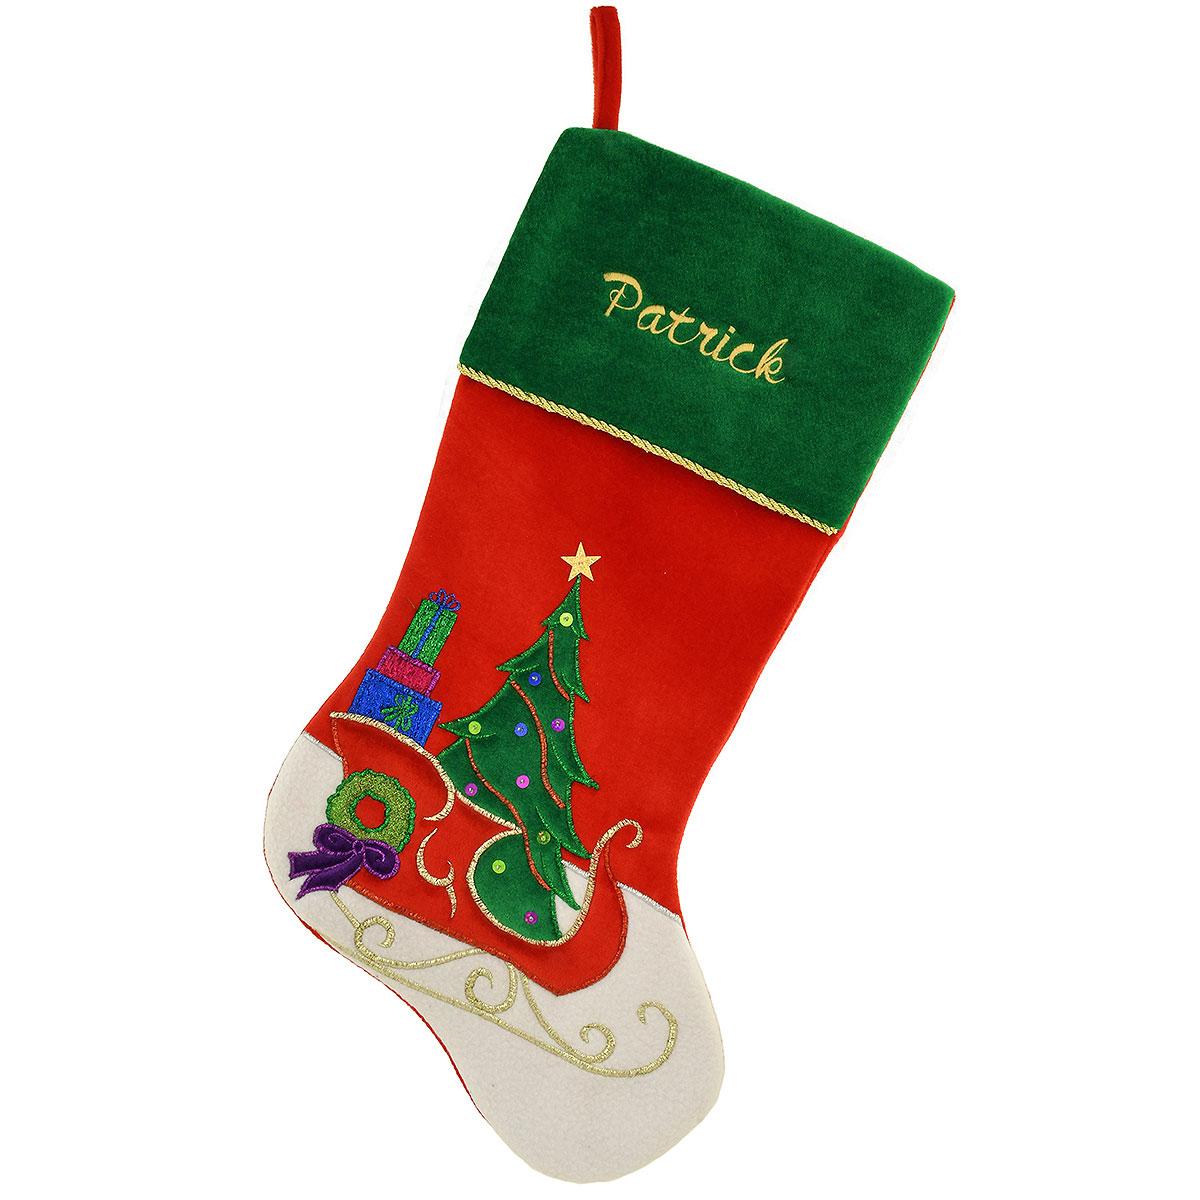 Personalized Stocking With Sleigh